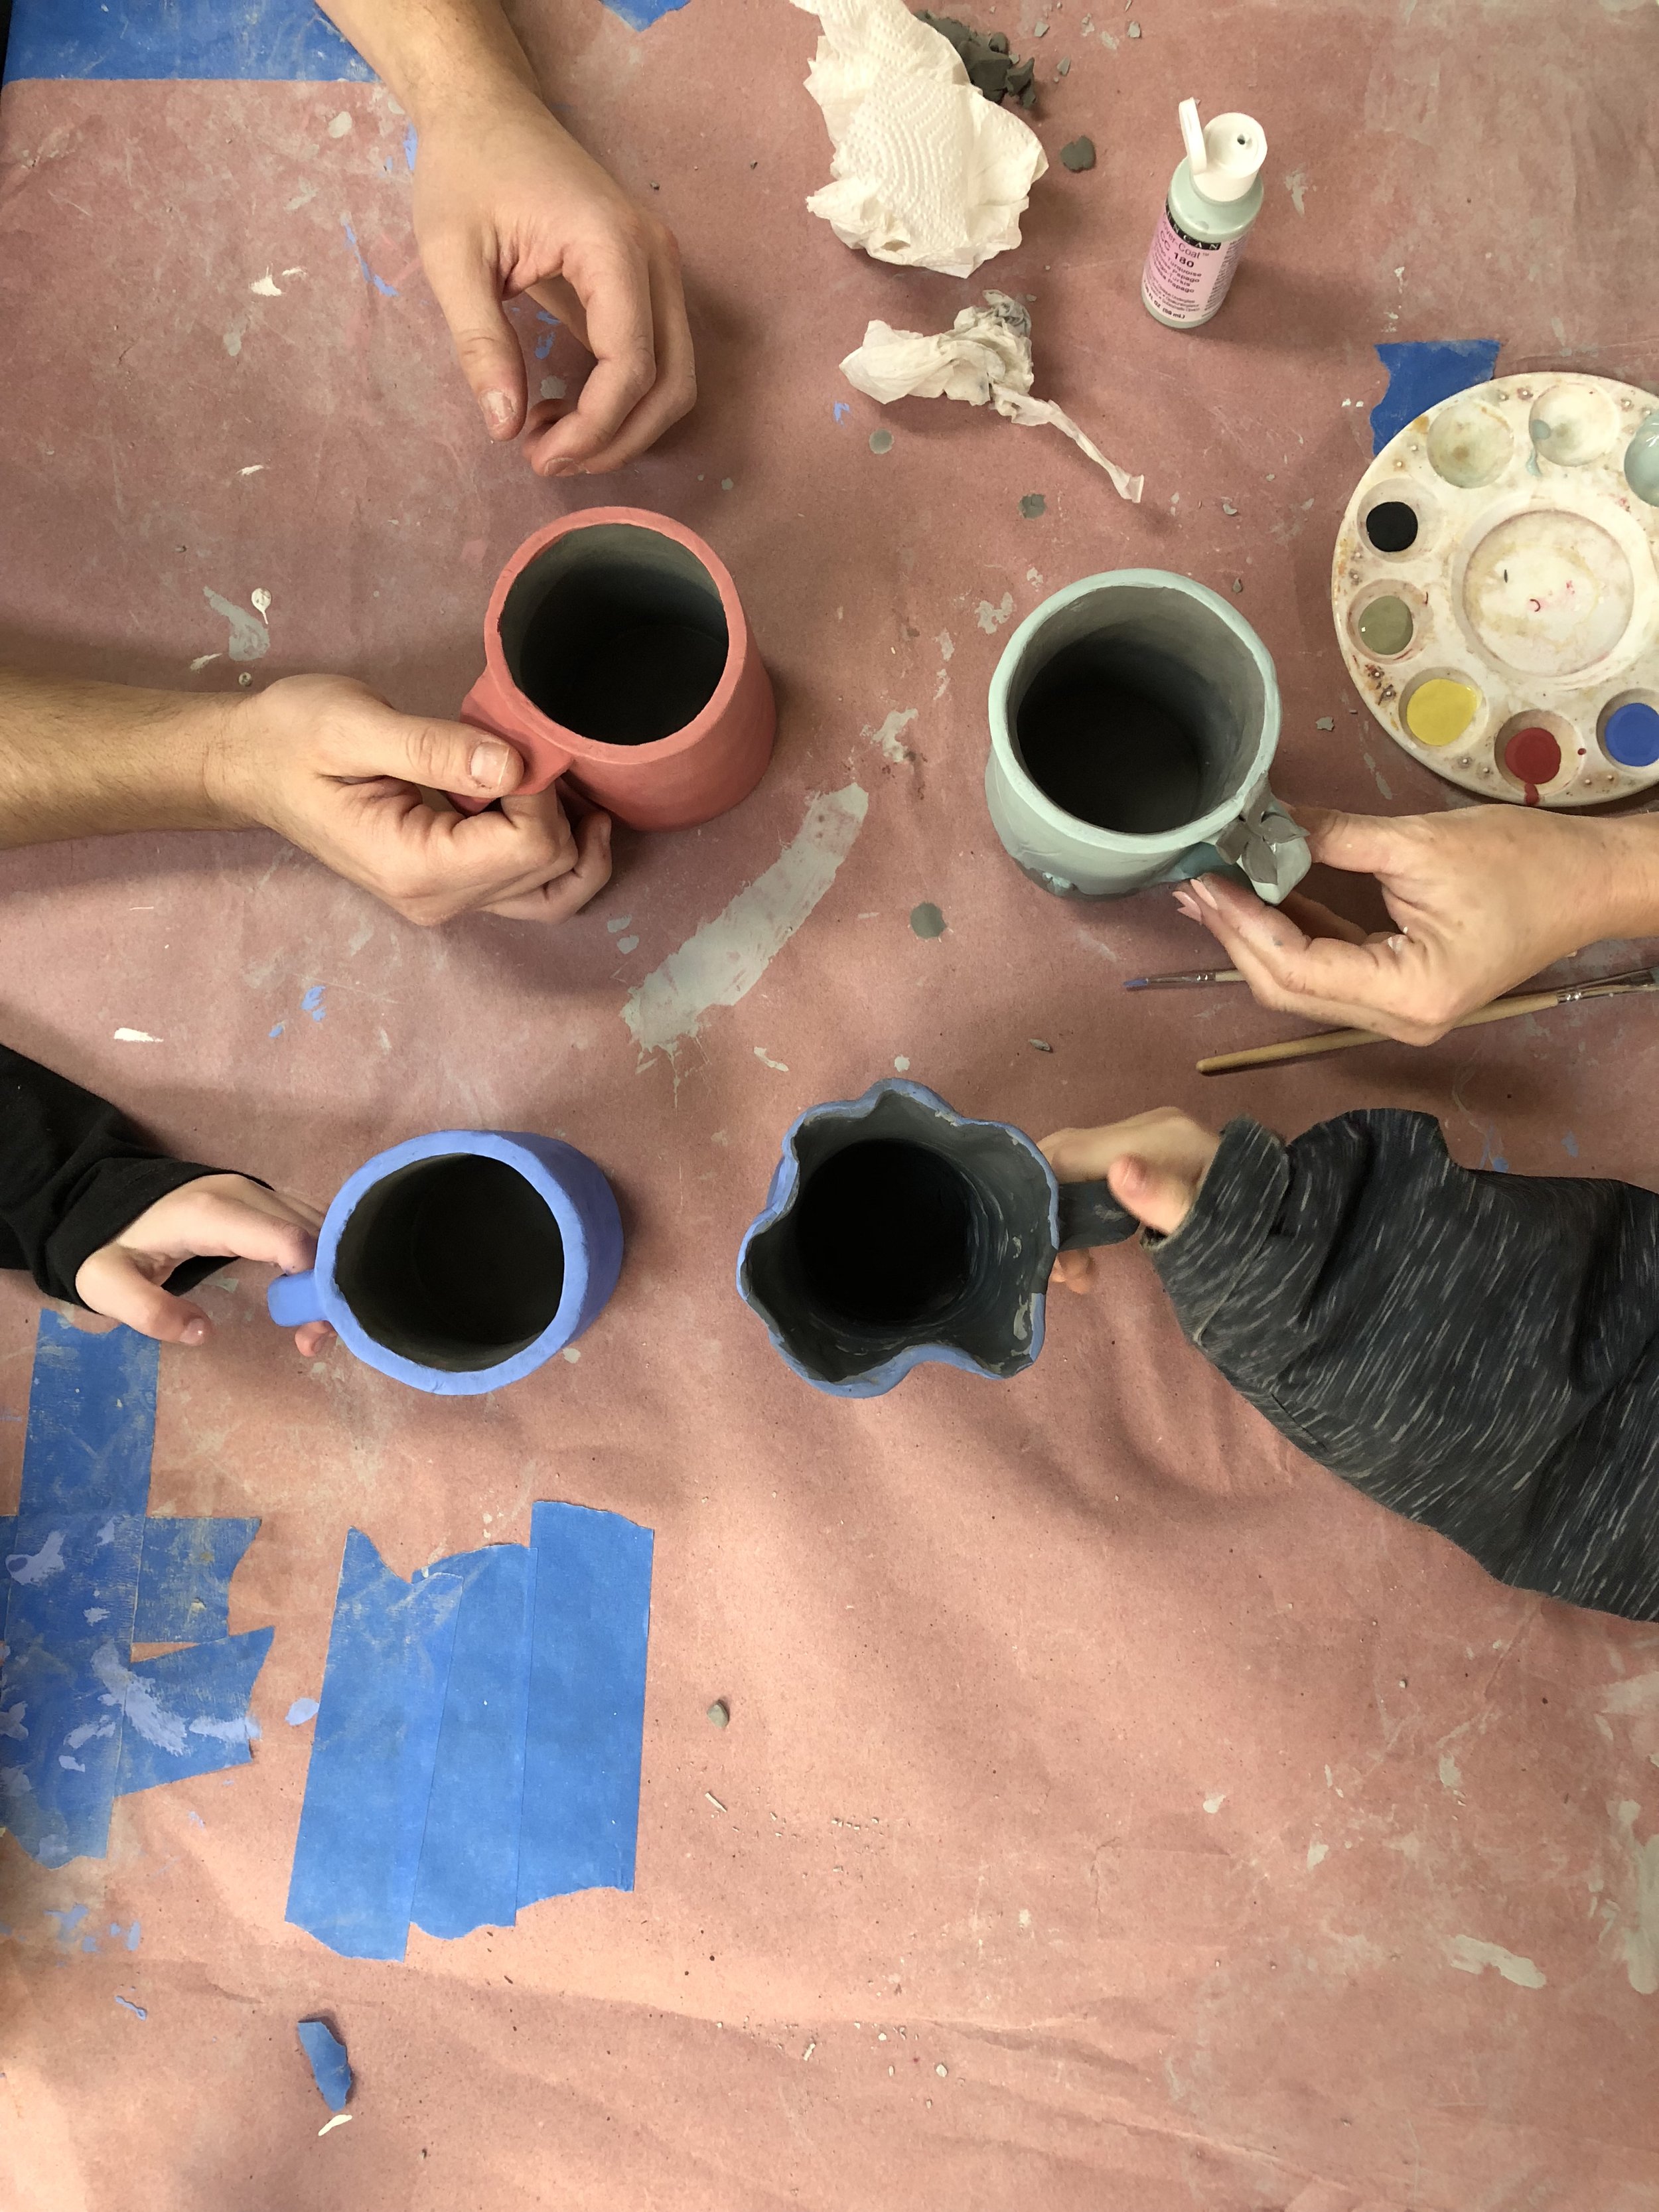 2 hour private hand building clay and pottery wheel party